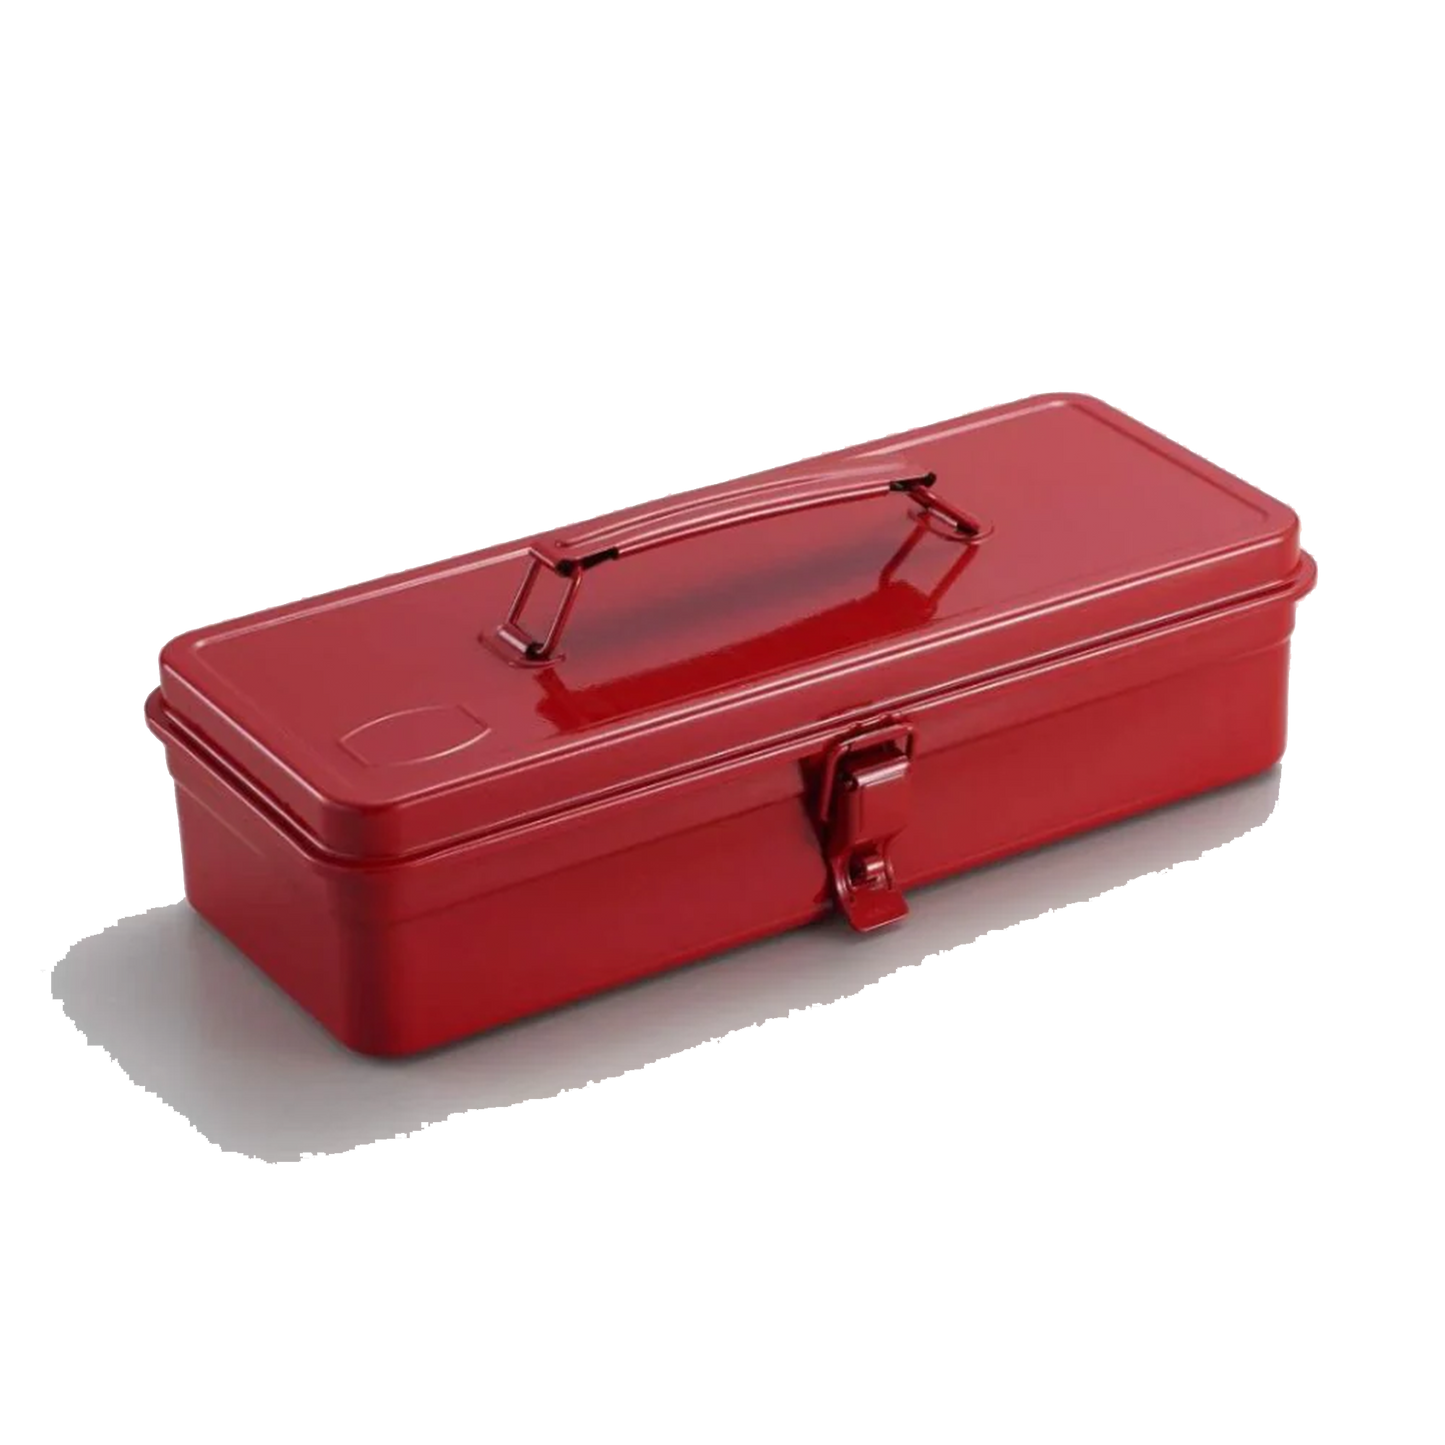 TOYO STEEL Toolbox T-320 Red